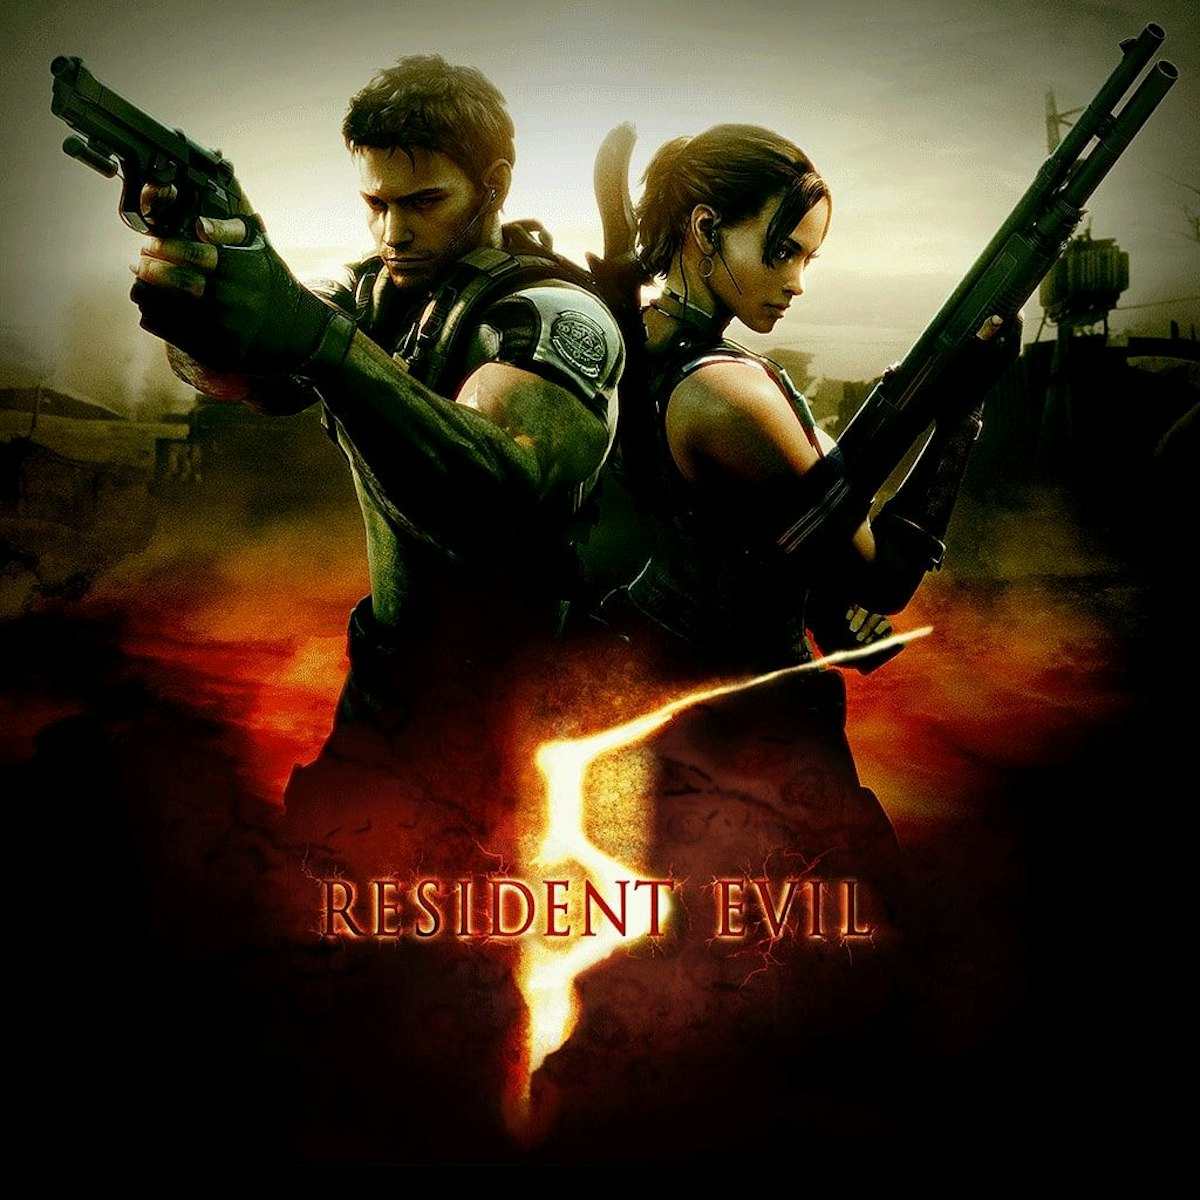 featured image - Will Resident Evil 5 Remake Be the Next RE Remake from Capcom?